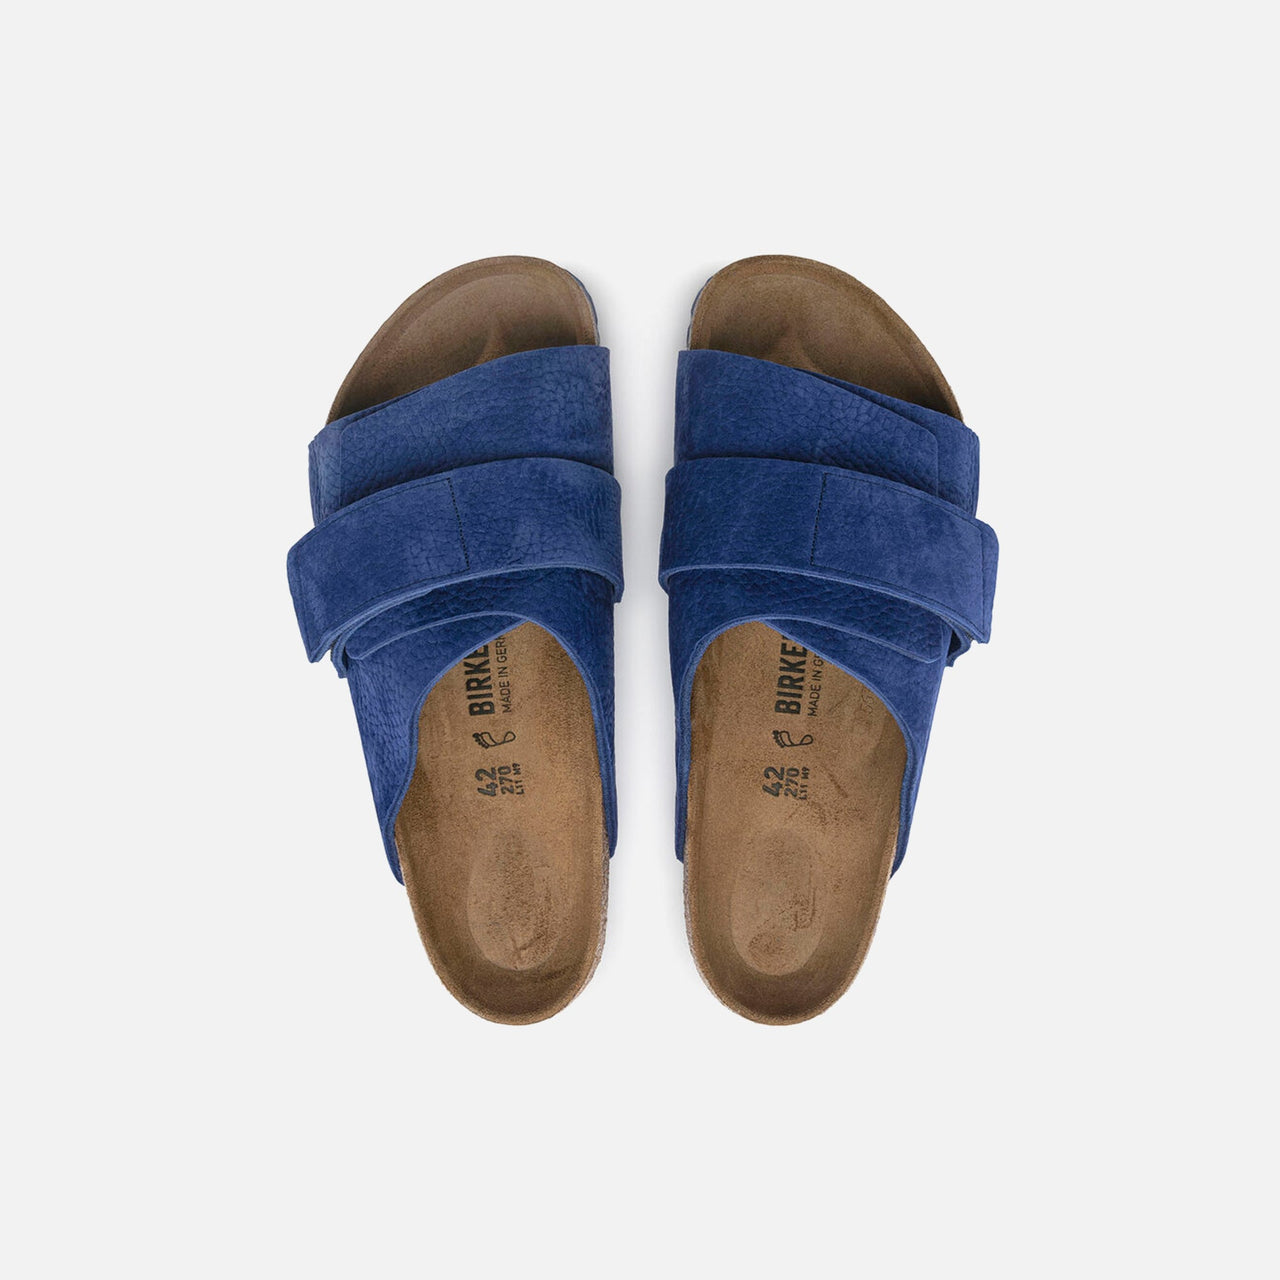 Stylish and comfortable Birkenstock Kyoto Suede Ultra Blue sandal for everyday wear